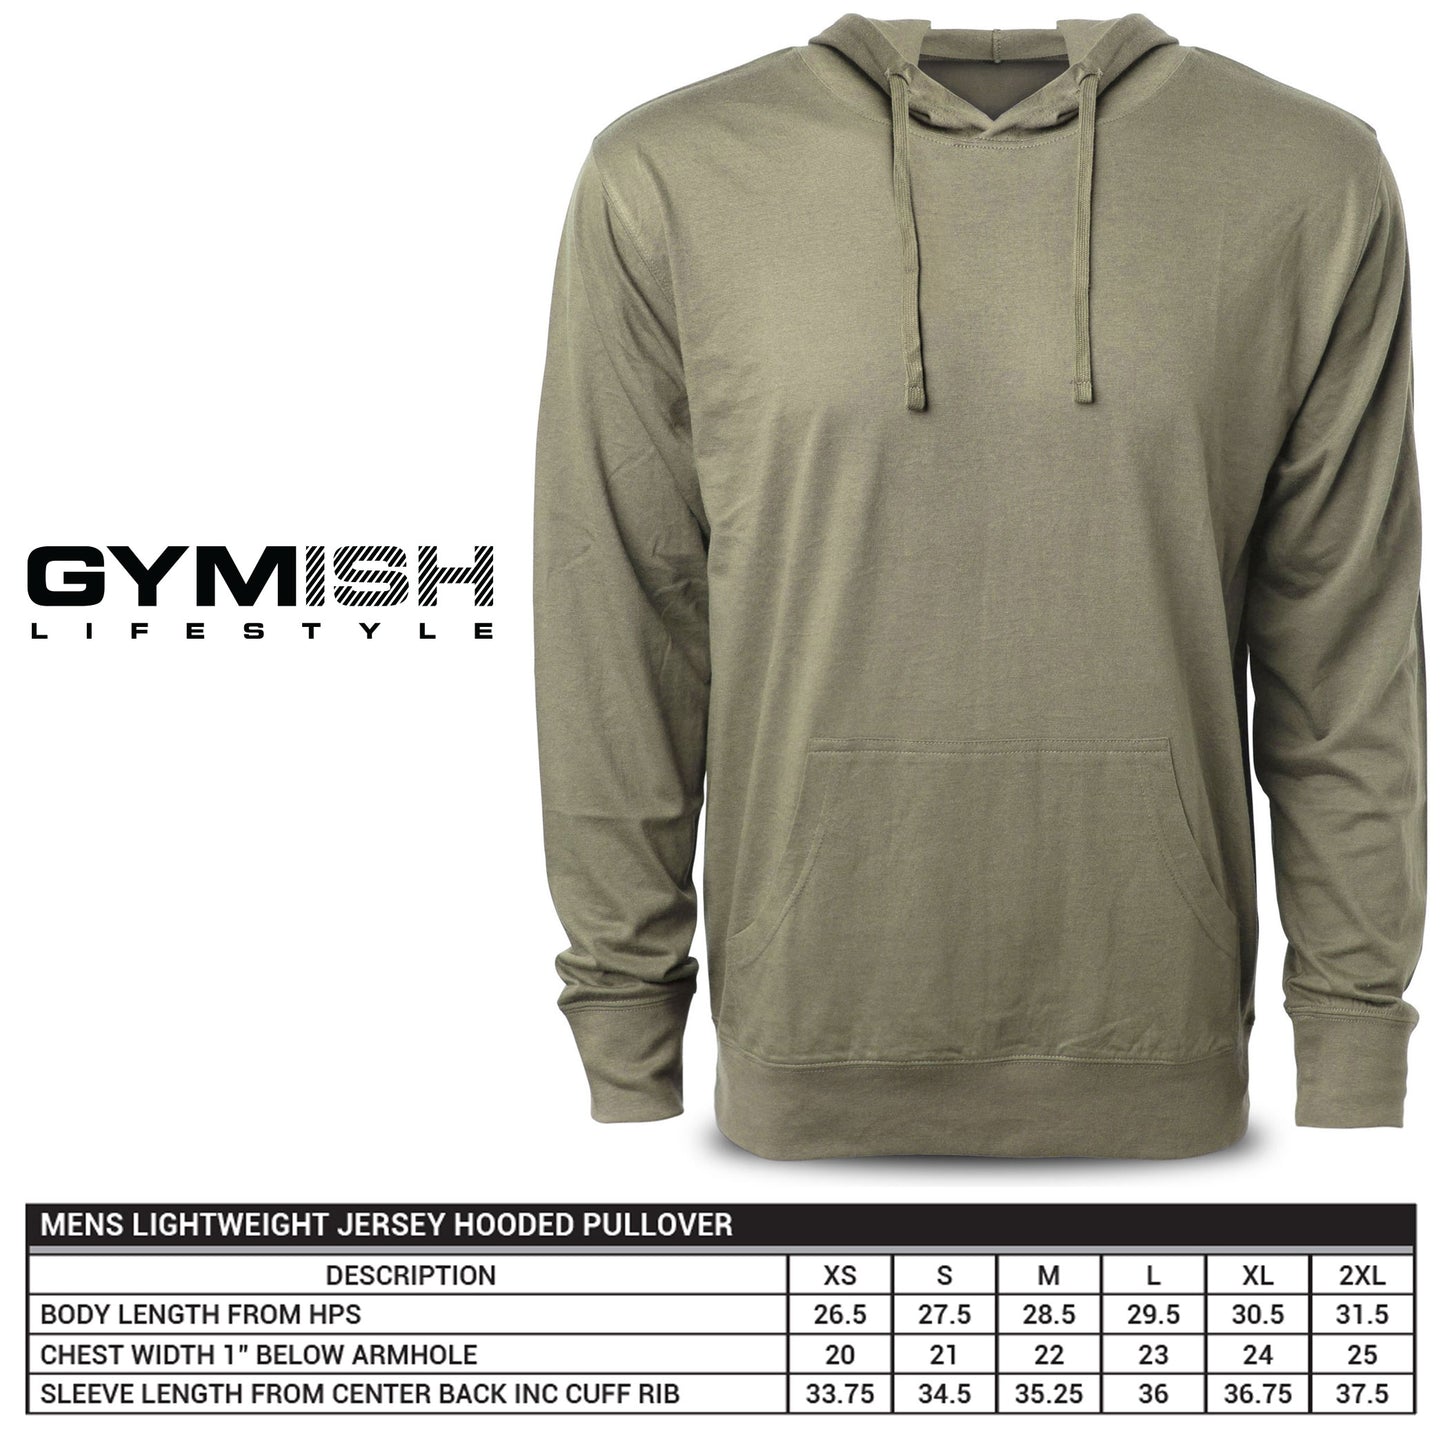 Gymish Lifestyle Hello Gym I’m Home Workout Muscle Fit Hoodie